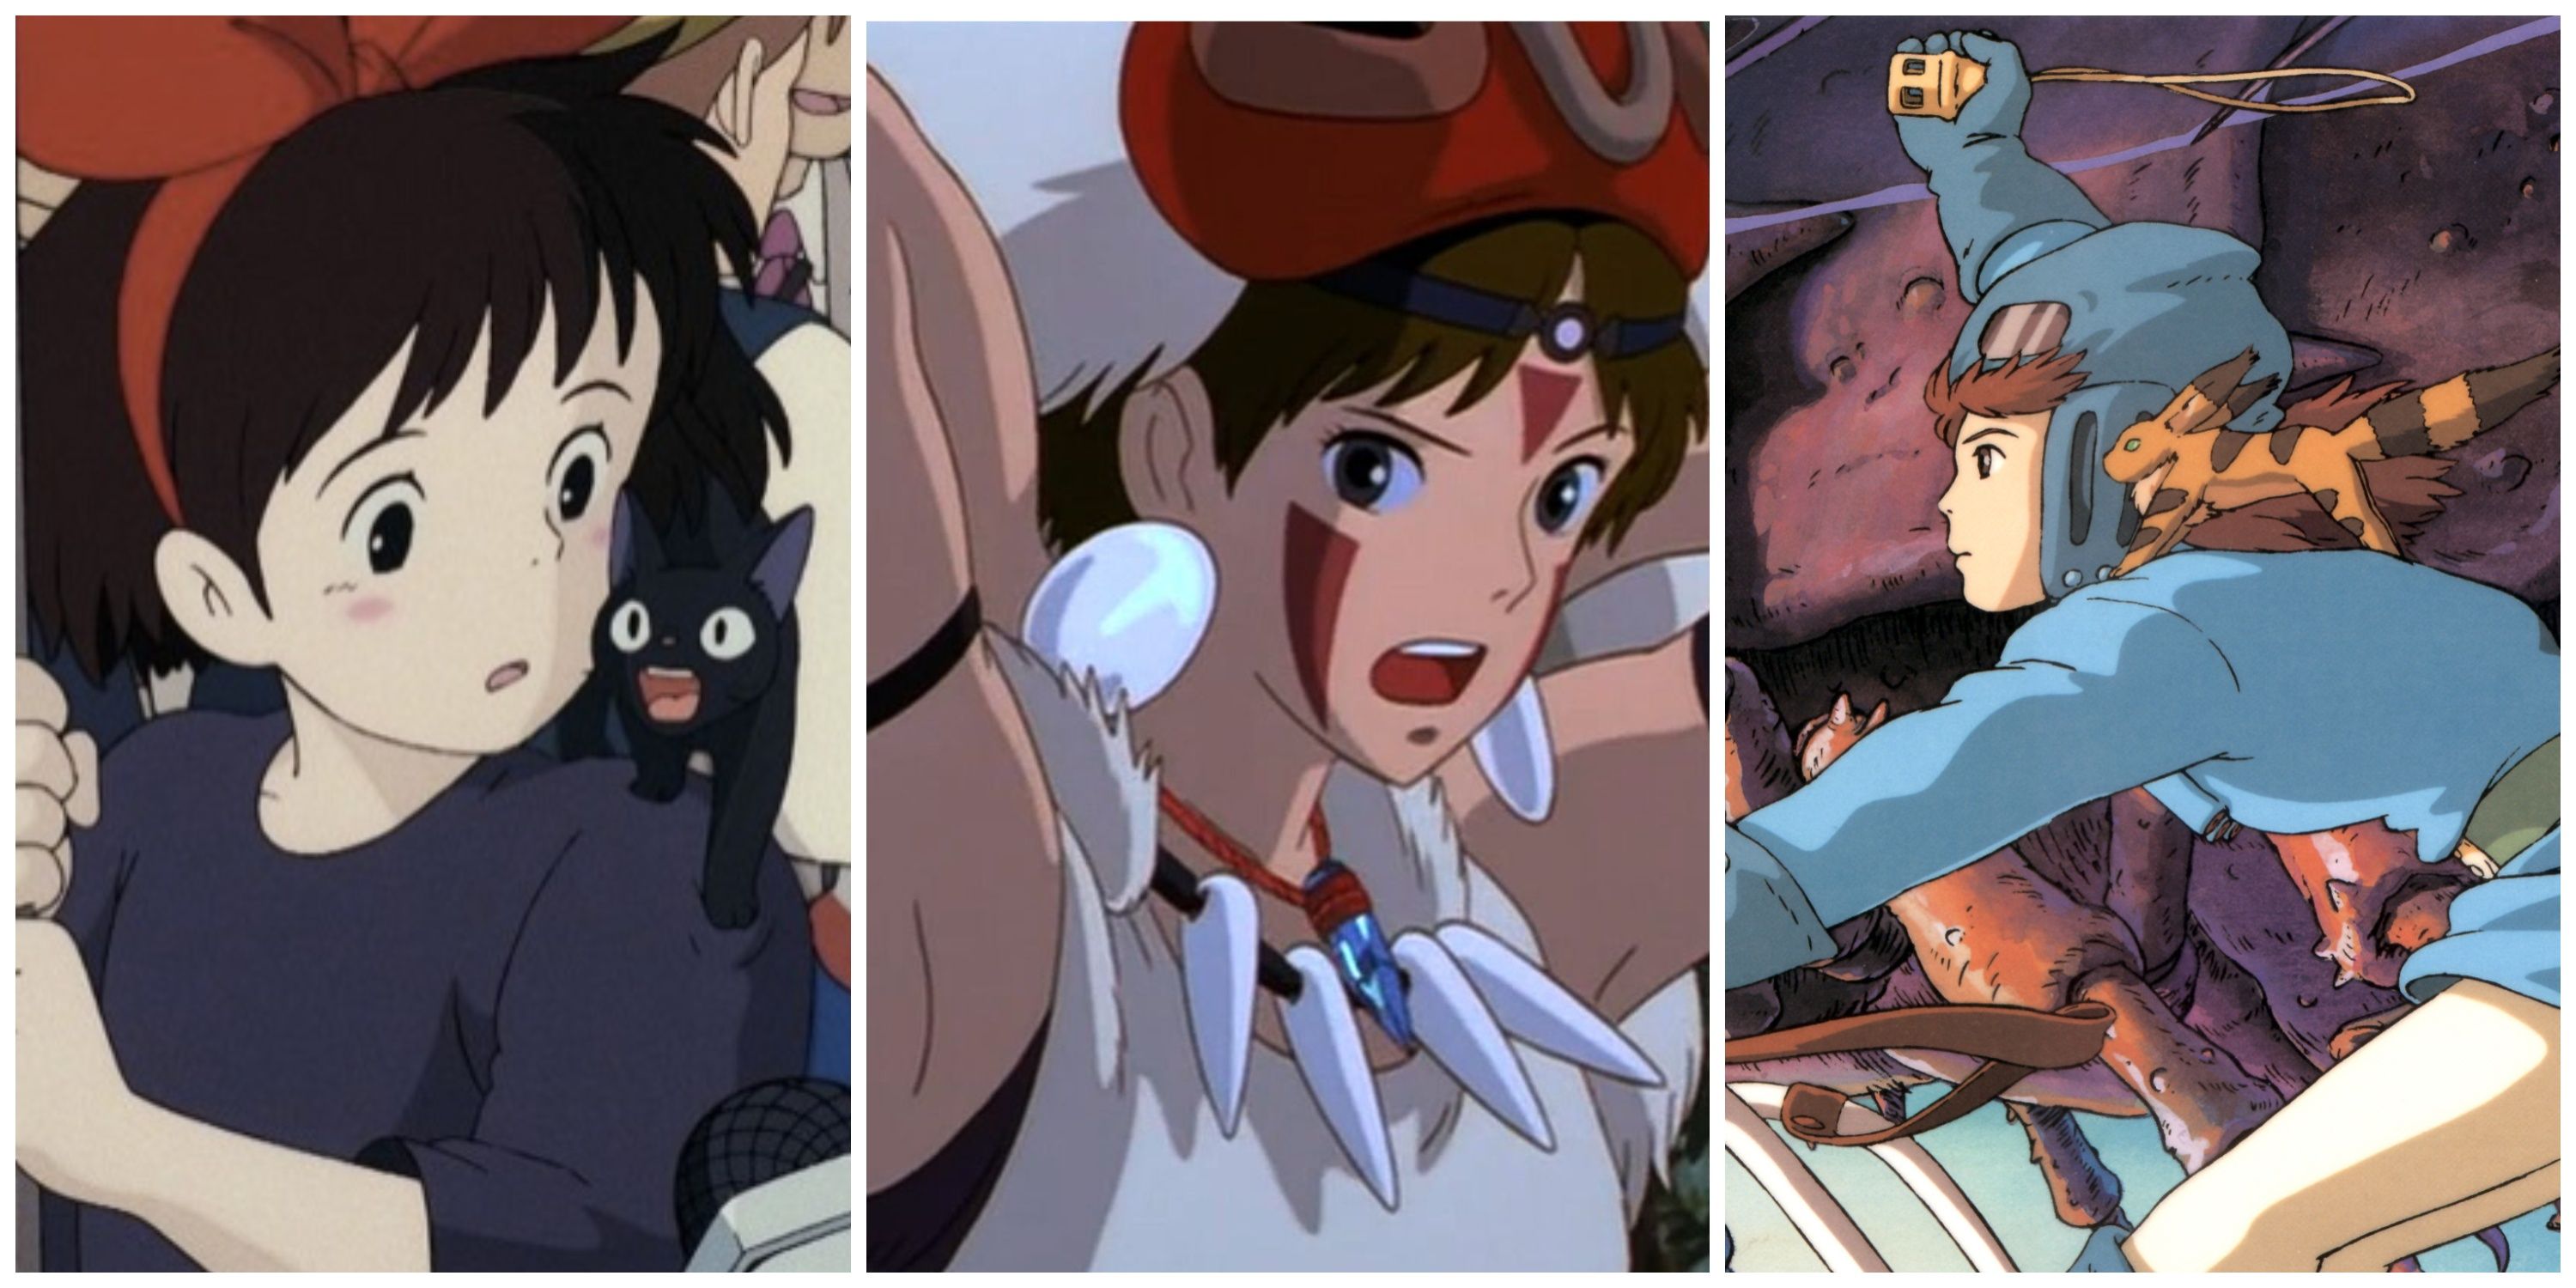 Split image, Kiki and Jiji from Kikis Delivery Service, San wearing a crystal dagger in Princess Mononoke, Nausicaa with the ohmu in Nausicaa of the Valley of the Wind